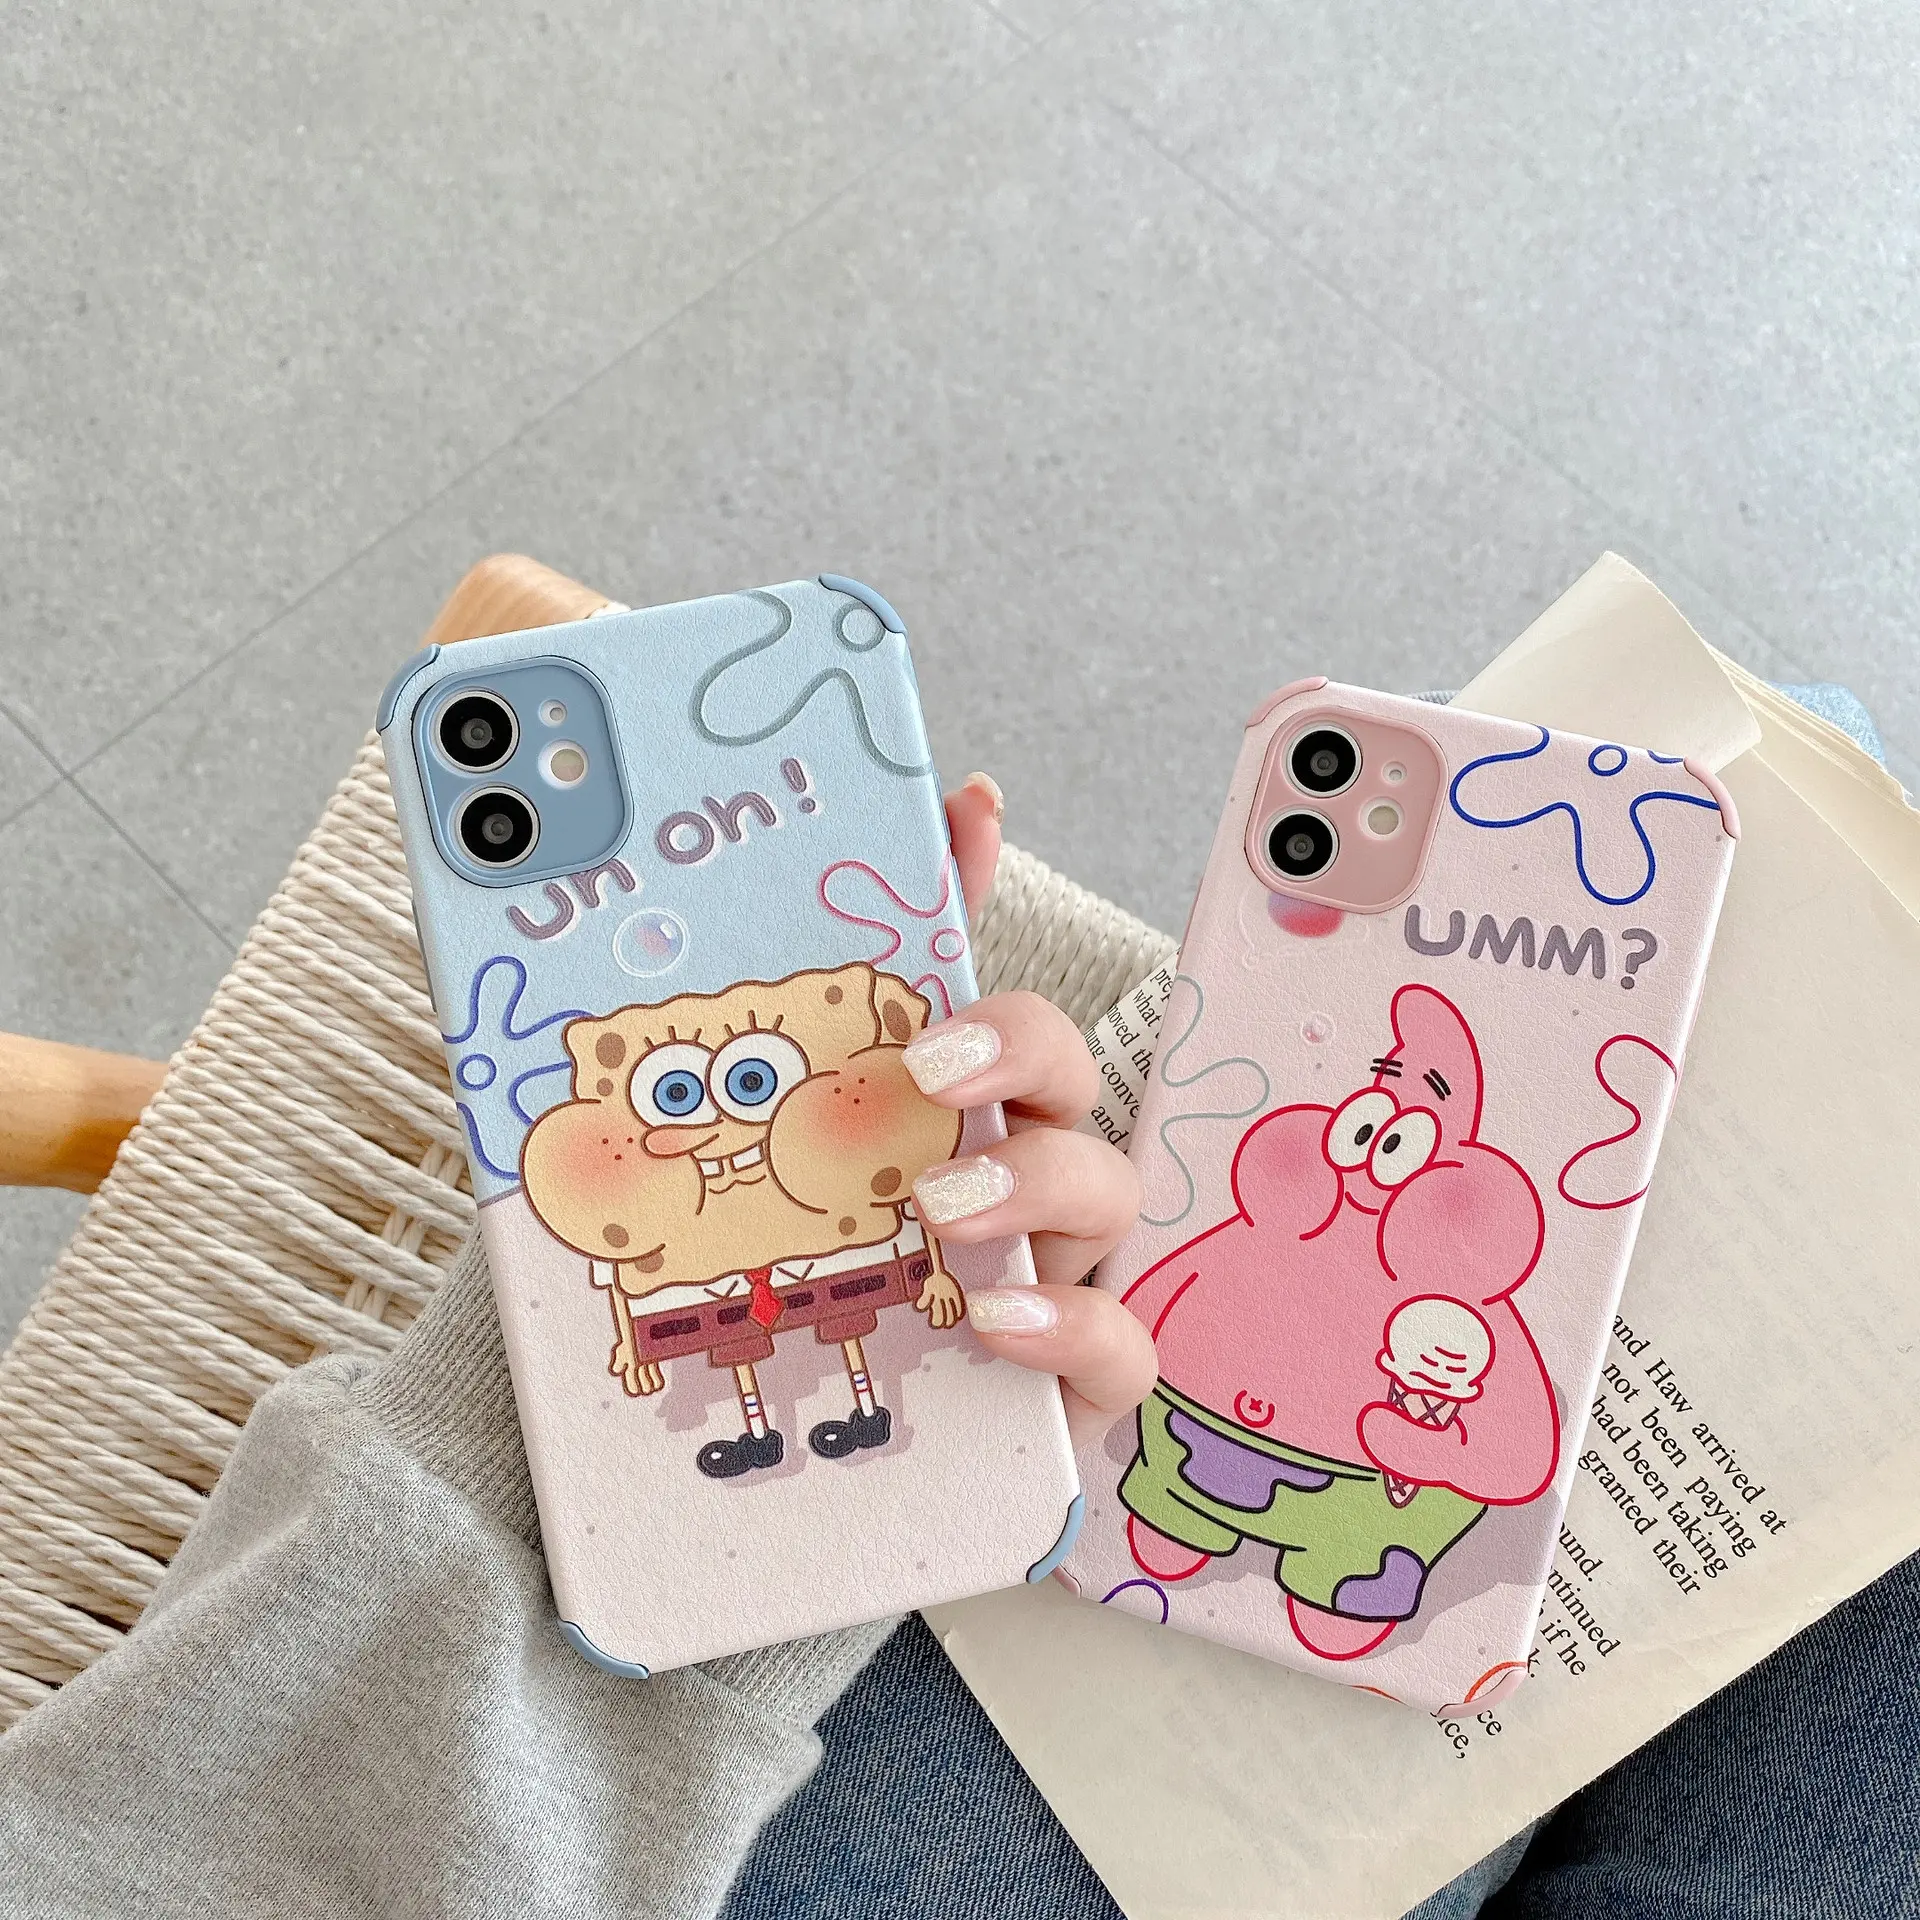 2021 for iPhone case TPU soft slim protective cover for iPhone 11 Xs max 7 8 plus for iPhone 12 case print SpongeBob SquarePants